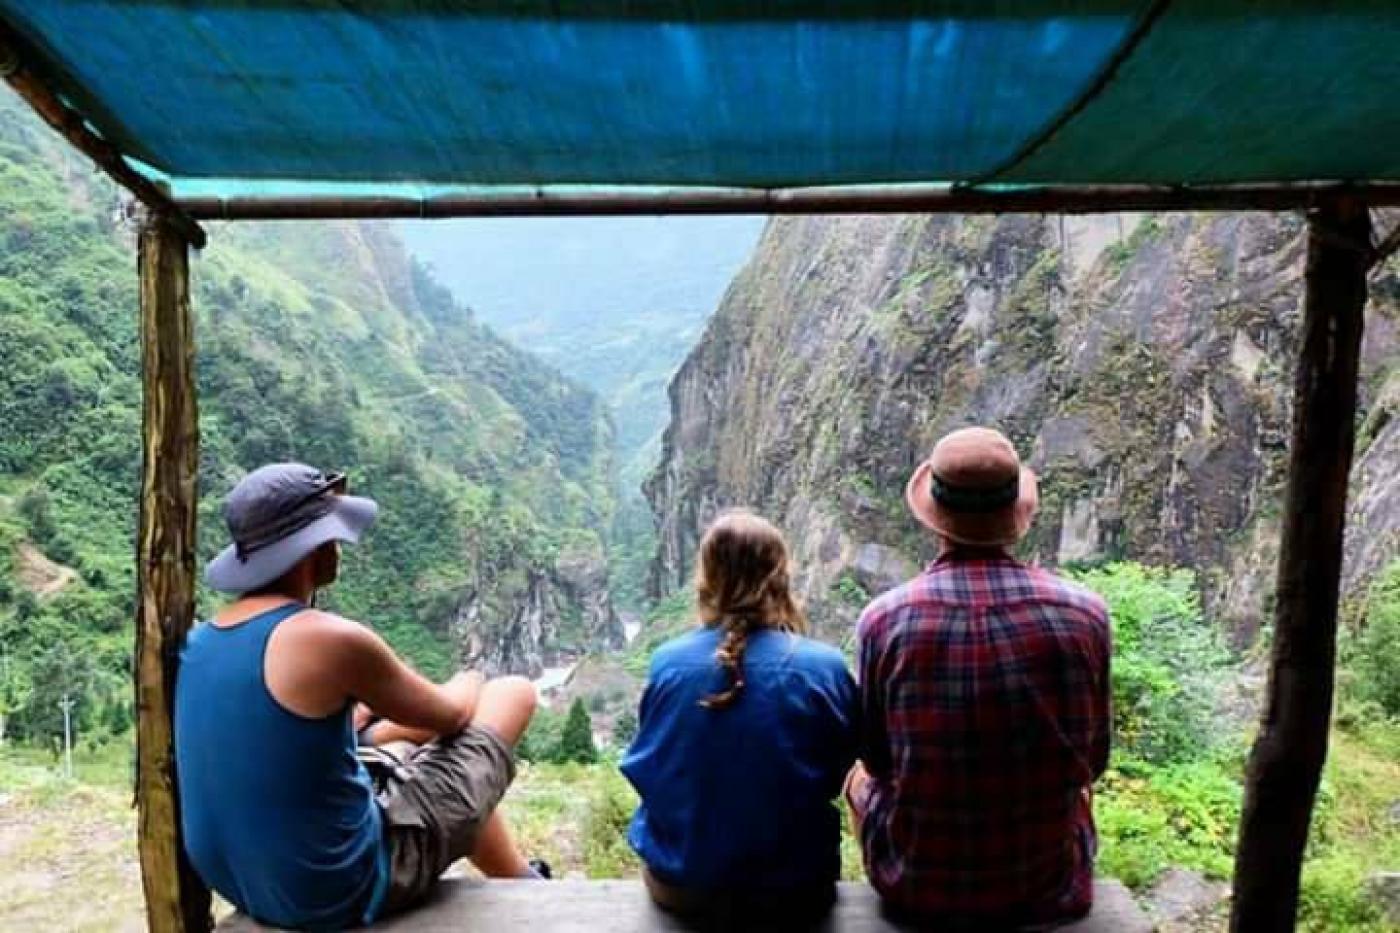 A moment of contemplation with friends after a gruelling afternoon of trekking in Nepal.